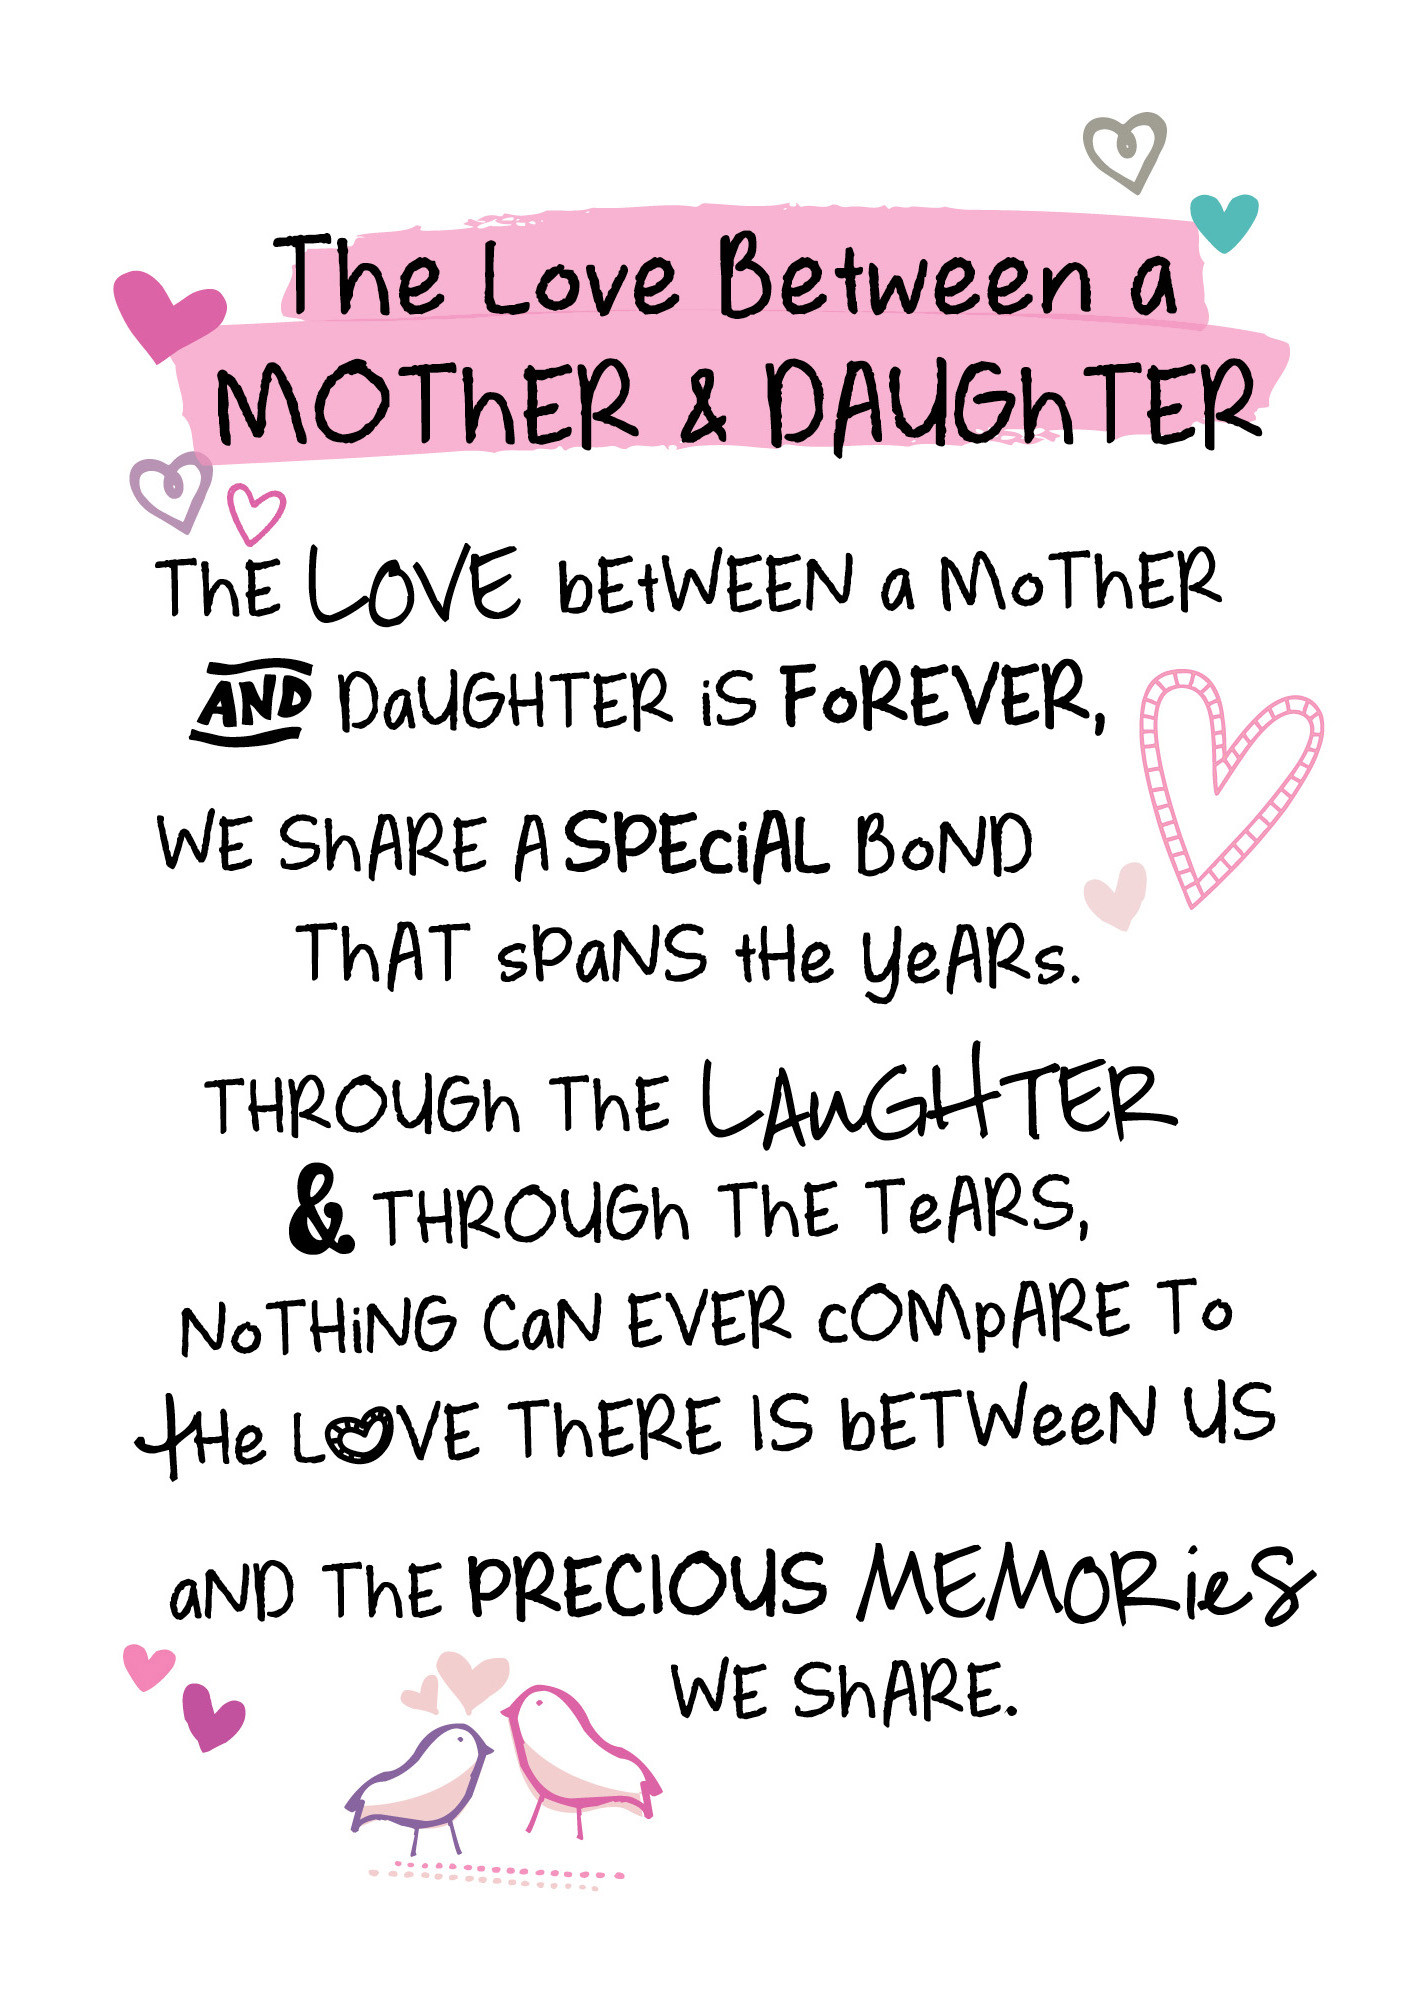 Birthday Cards For Mom From Daughter
 Mother & Daughter Love Inspired Words Greeting Card Blank